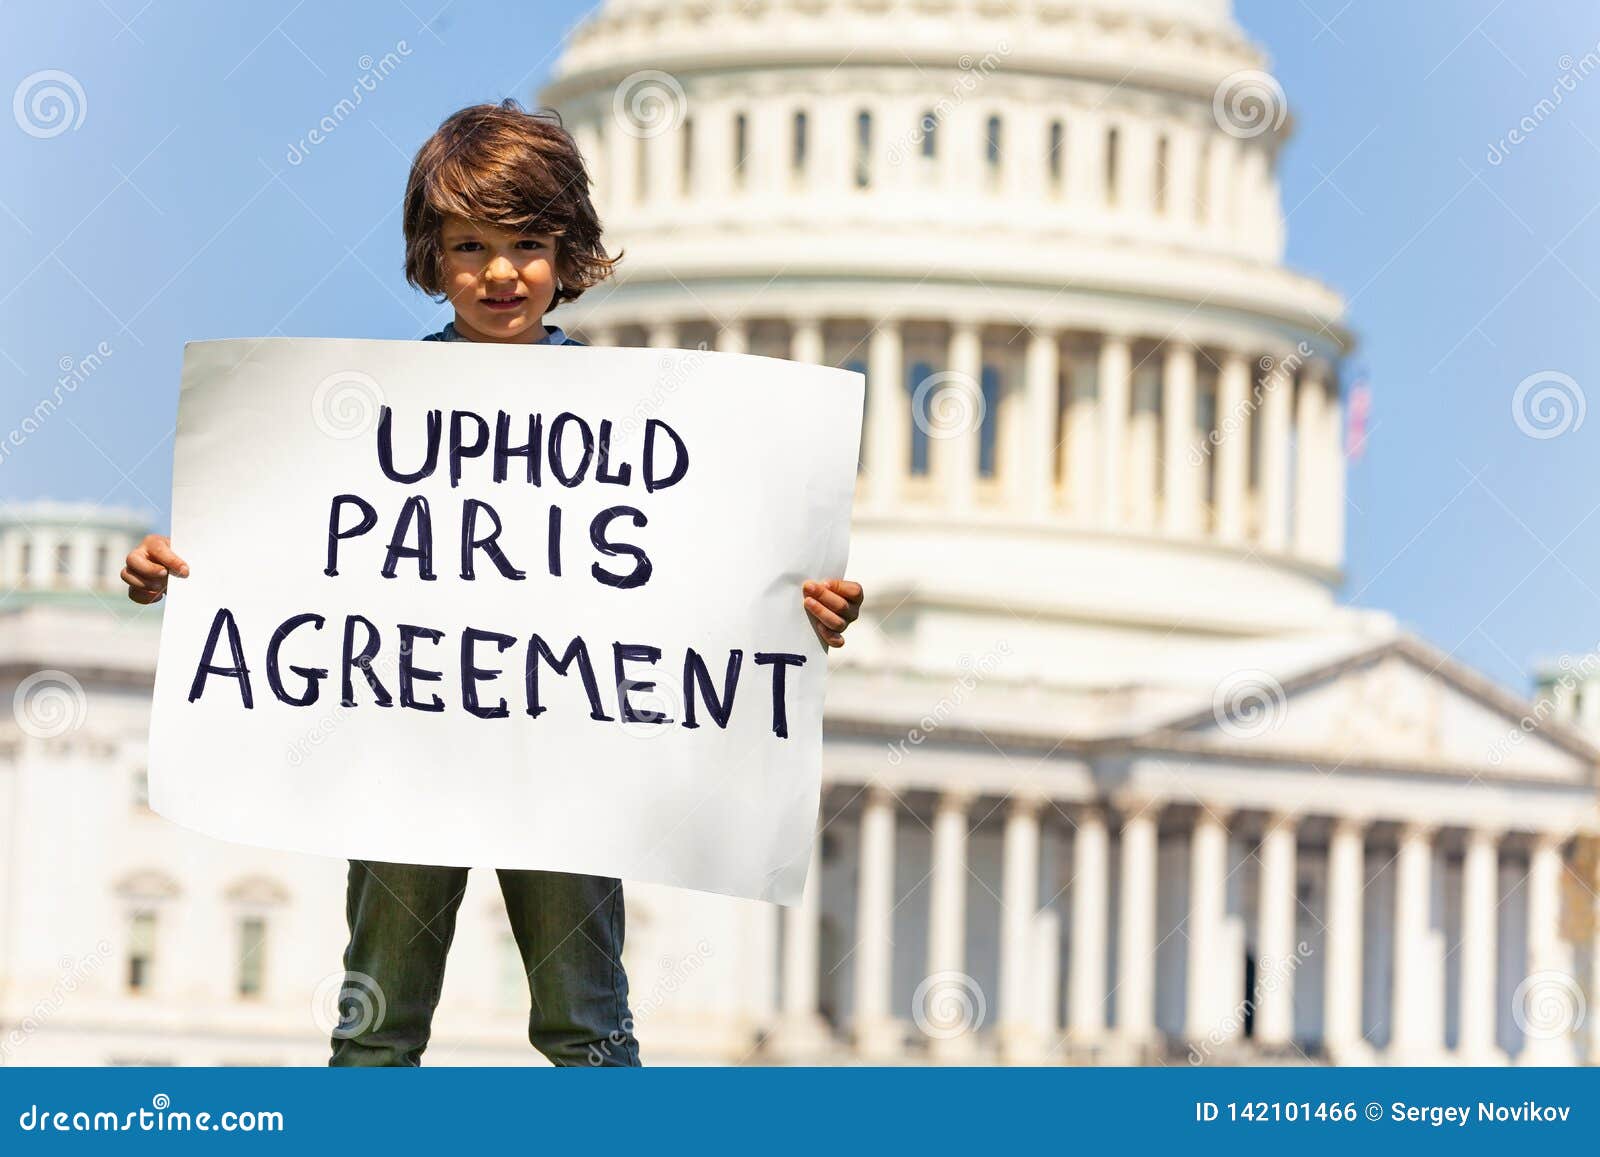 protester holding sign uphold paris agreement in hands